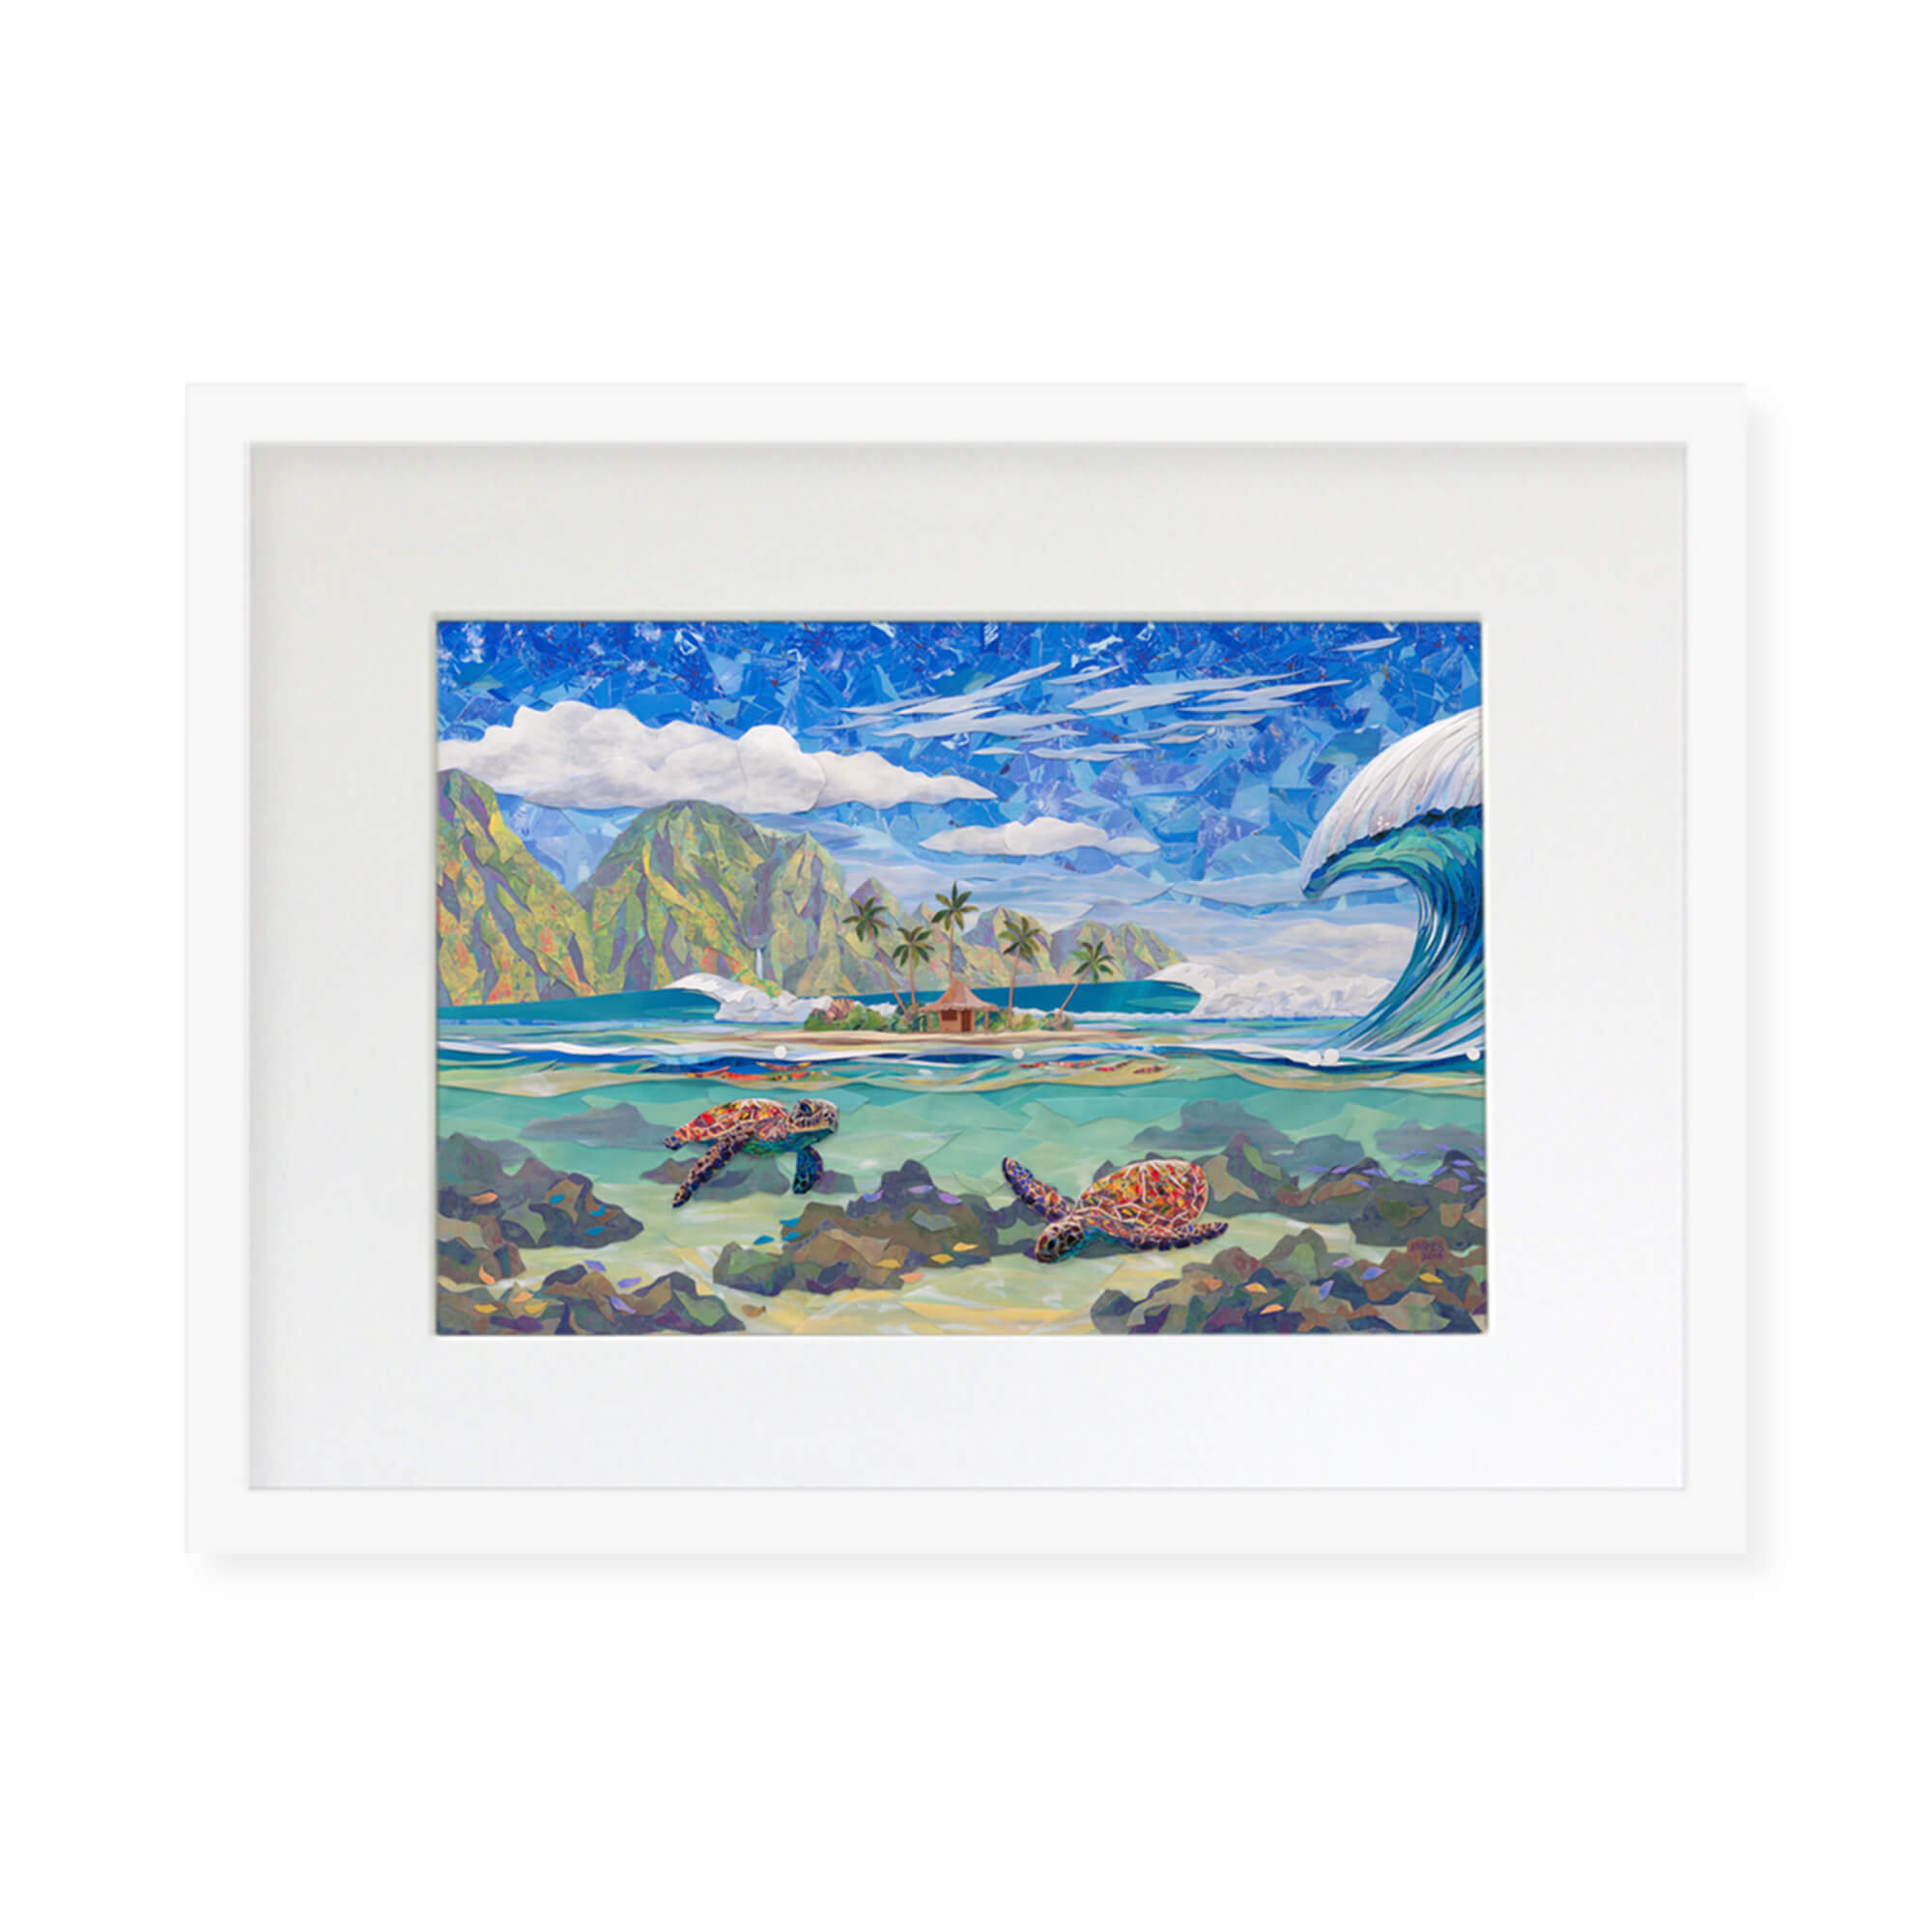 A framed matted art print featuring a collage of a tranquil seascape with two swimming sea turtles a hut on an island, a huge crashing wave, and a mountain background by Hawaii artist Patrick Parker